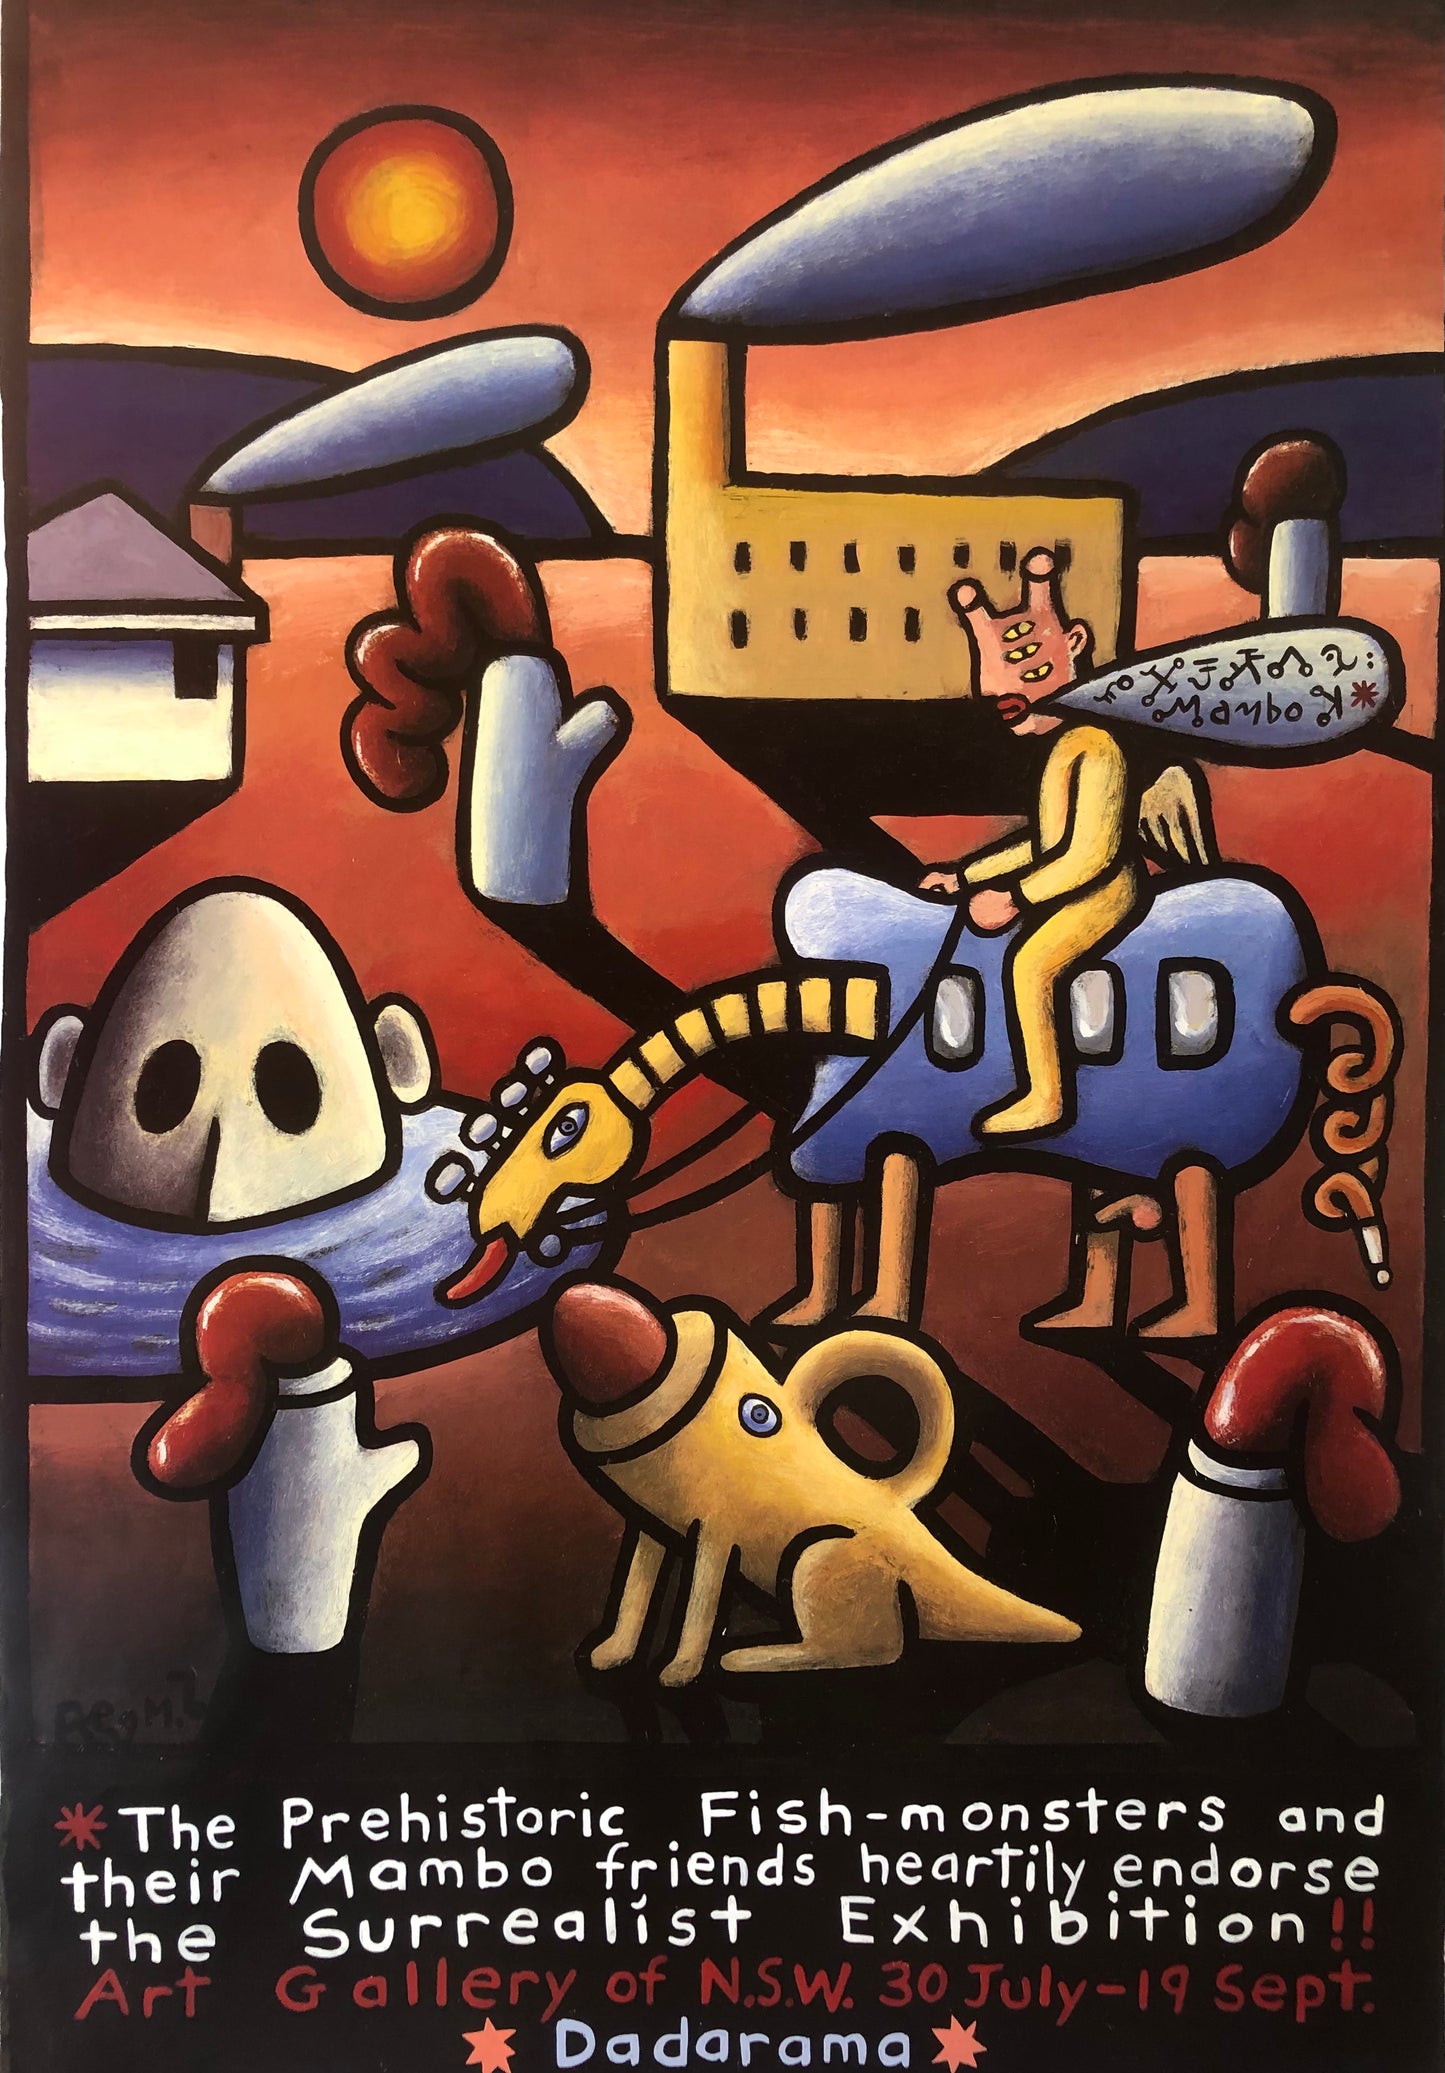 Mambo Exhibition Poster, Art Gallery of NSW